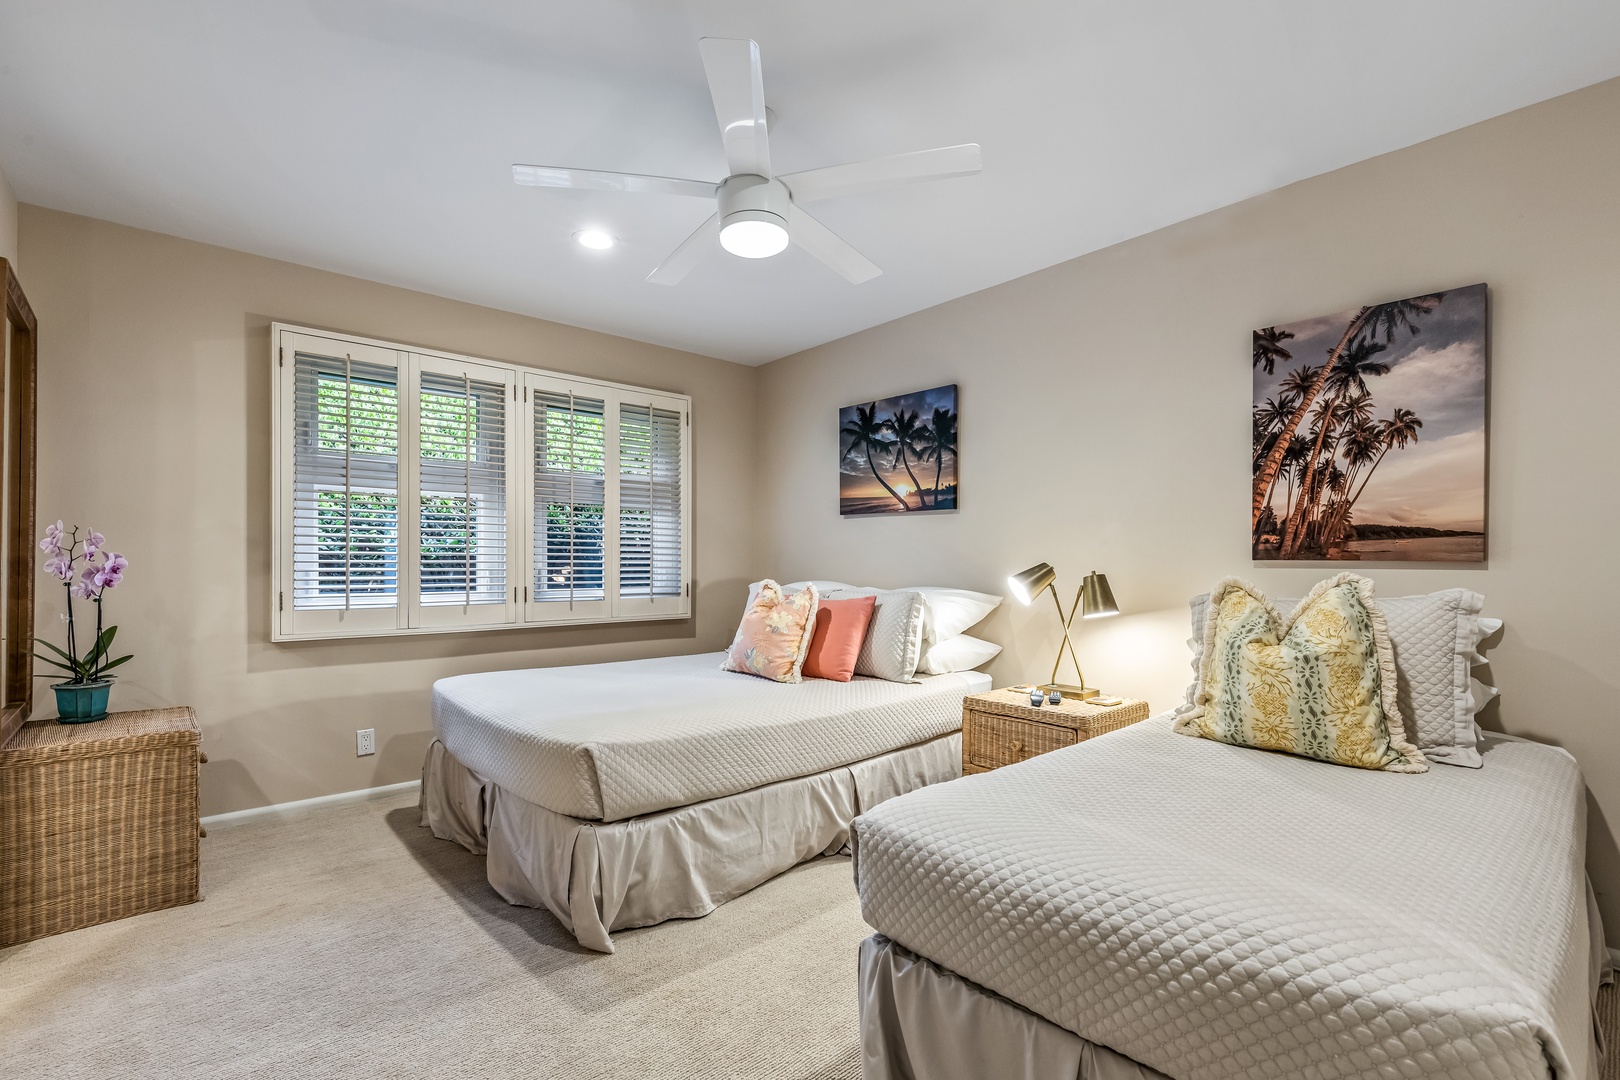 Honolulu Vacation Rentals, Hale Ola - Guest bedroom 2 ,beds have been updated to a King bed.